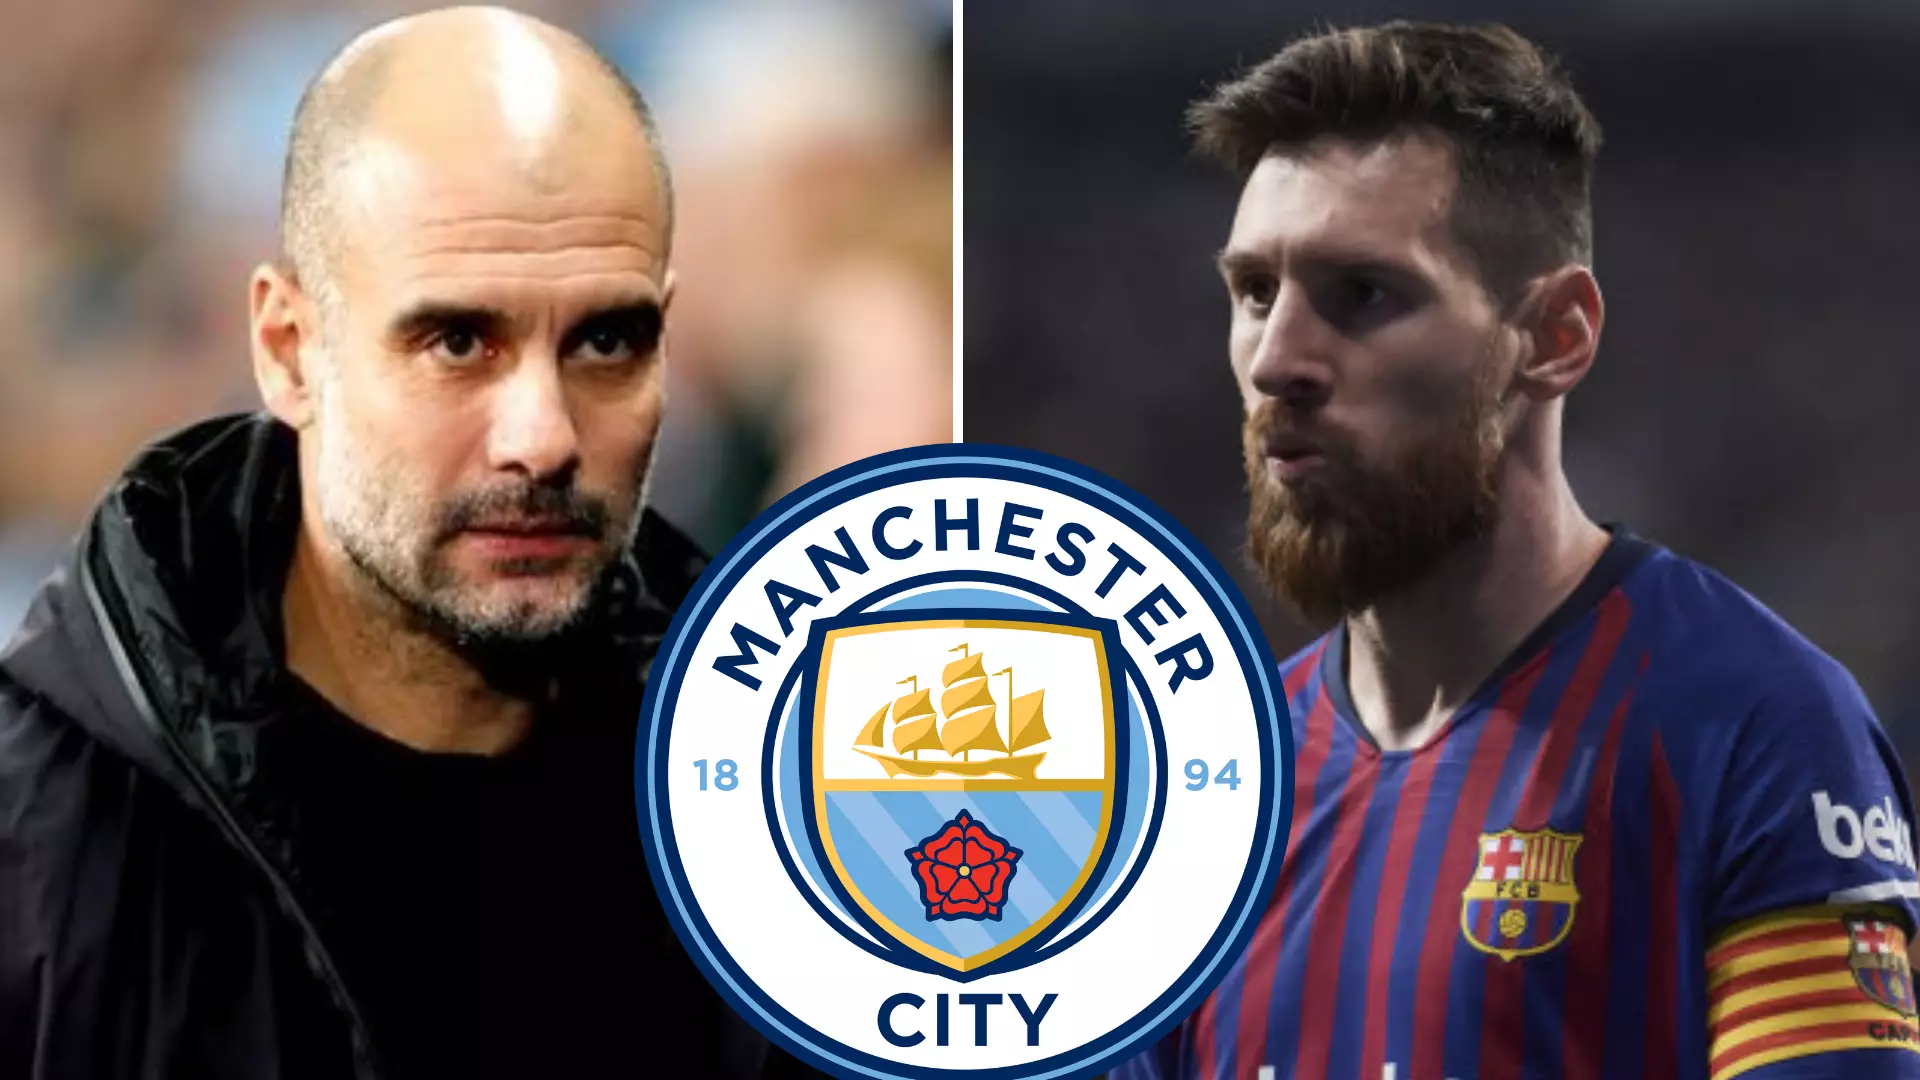 Manchester City To 'Make Room' For Lionel Messi’s Arrival By Axing Star Player